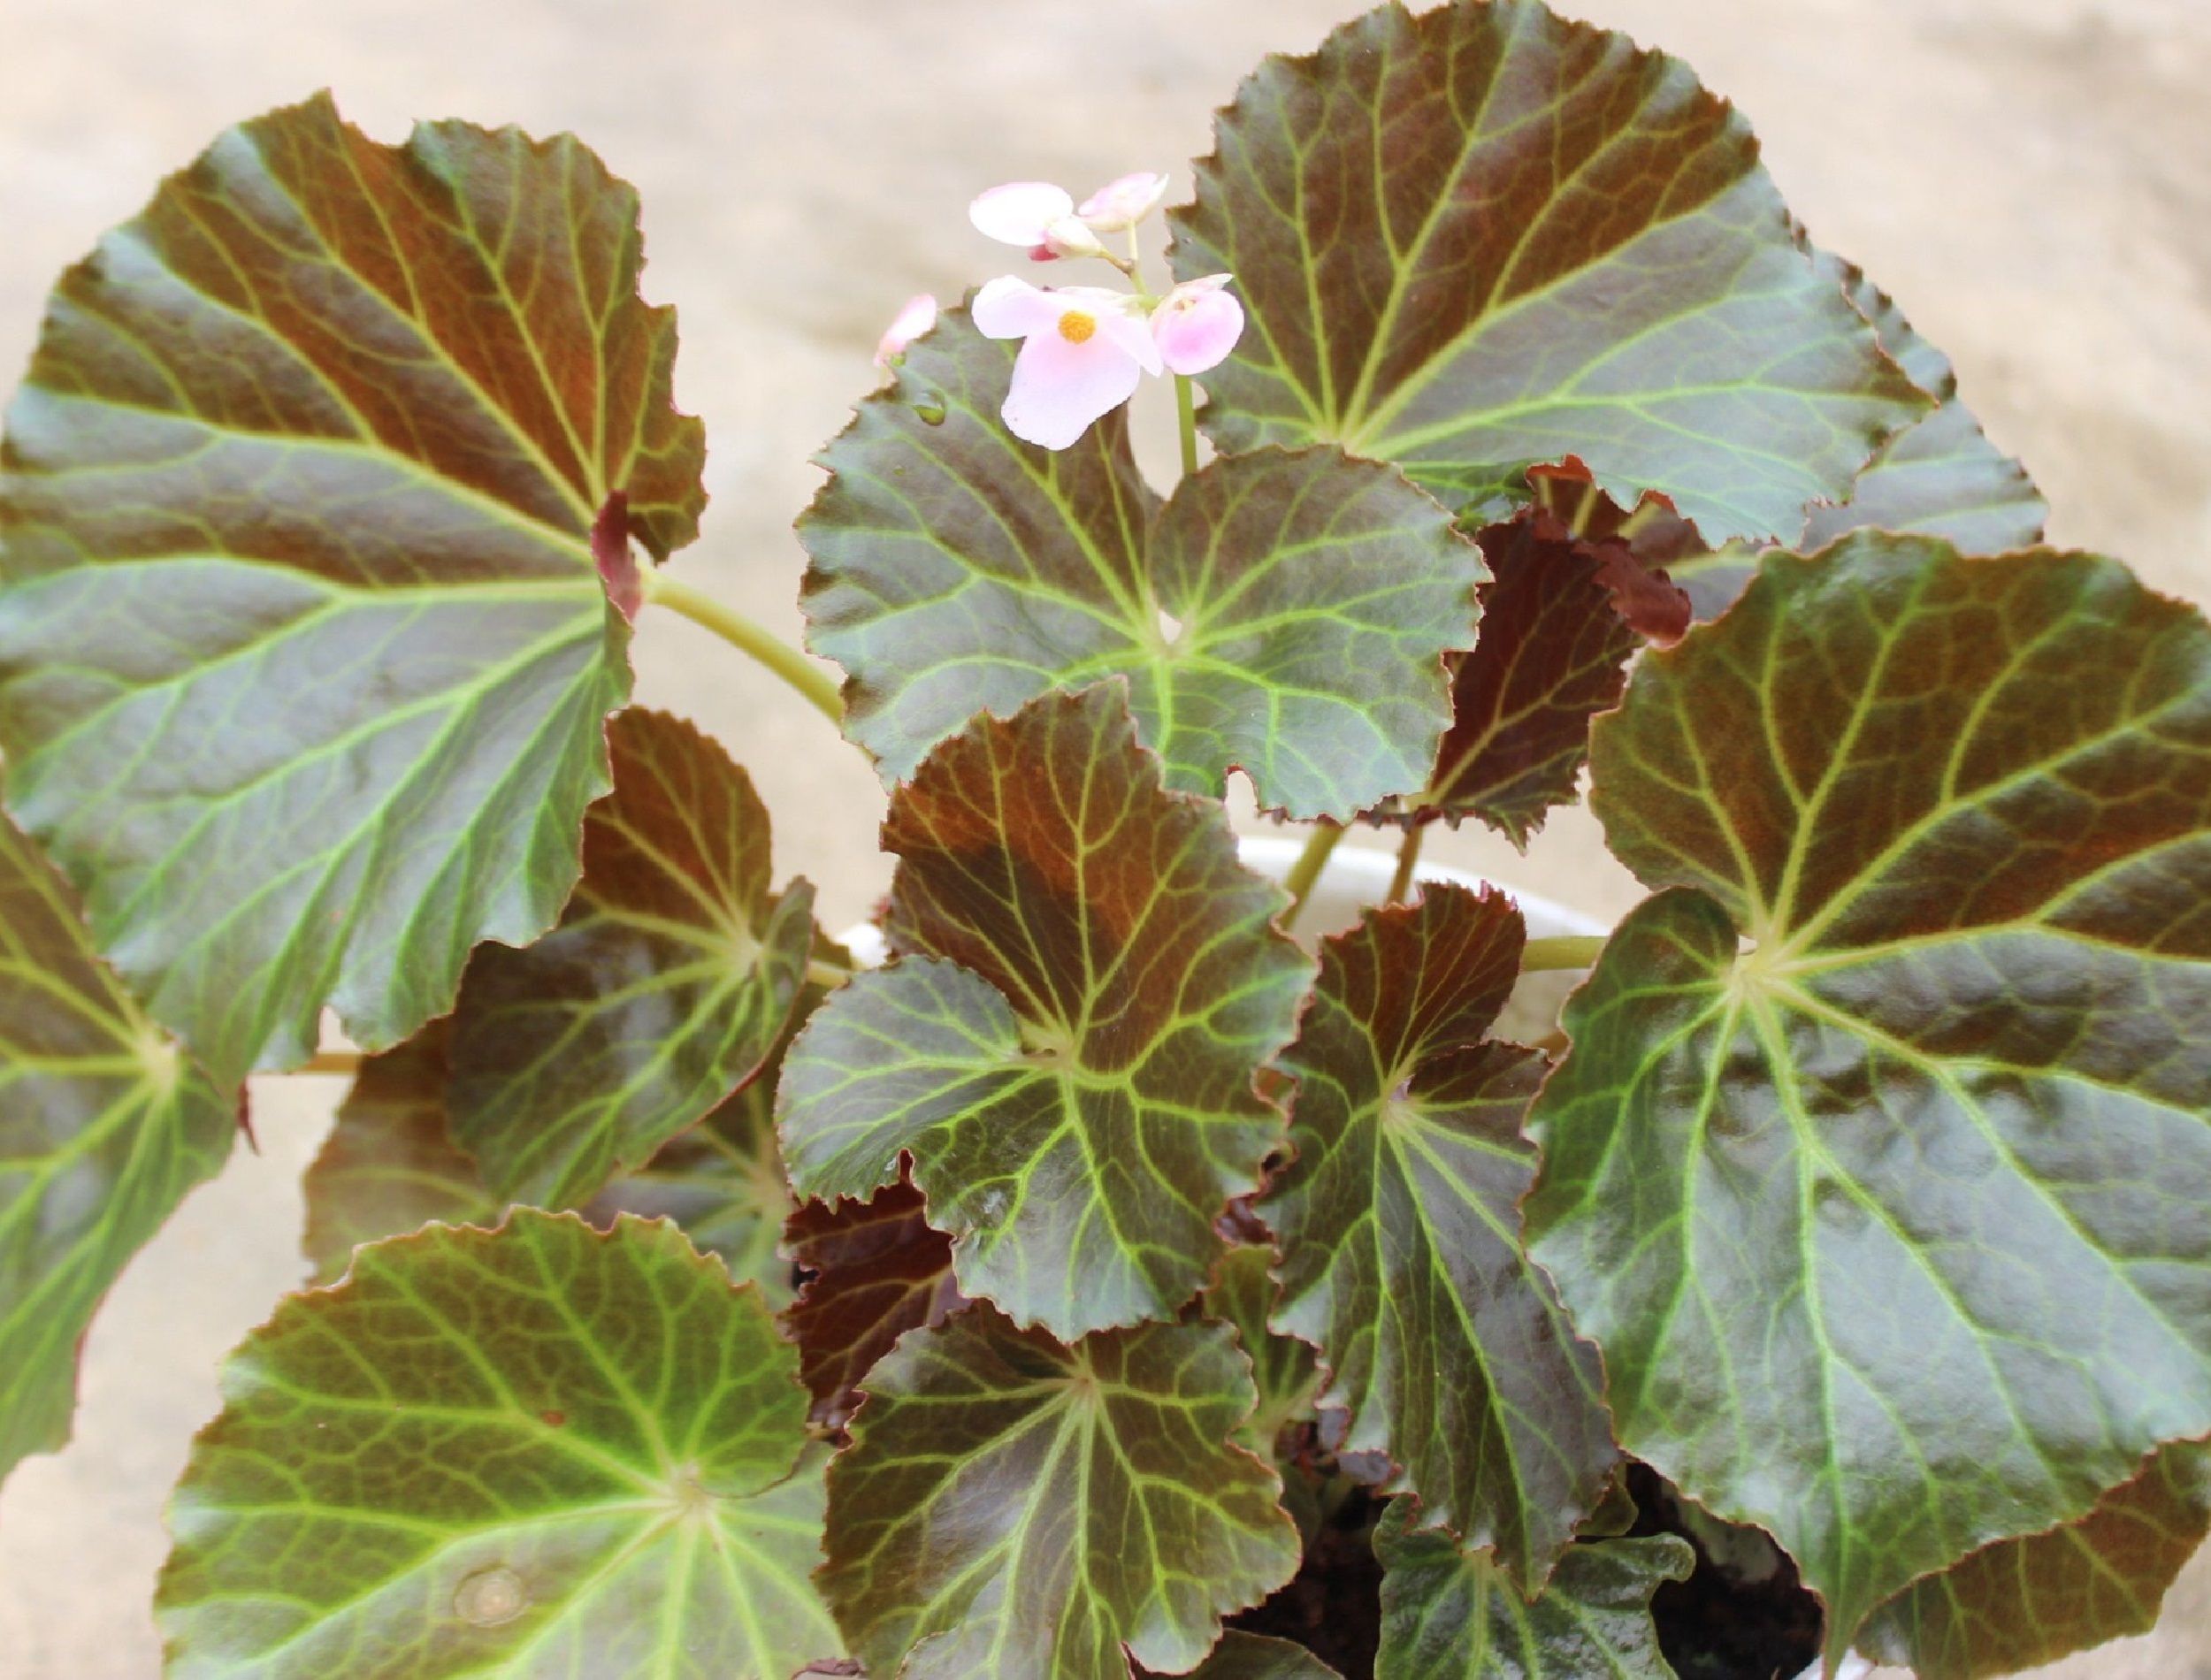 Strawberry begonia flowers in white pots with lush leaf growth and beautiful pink flower buds